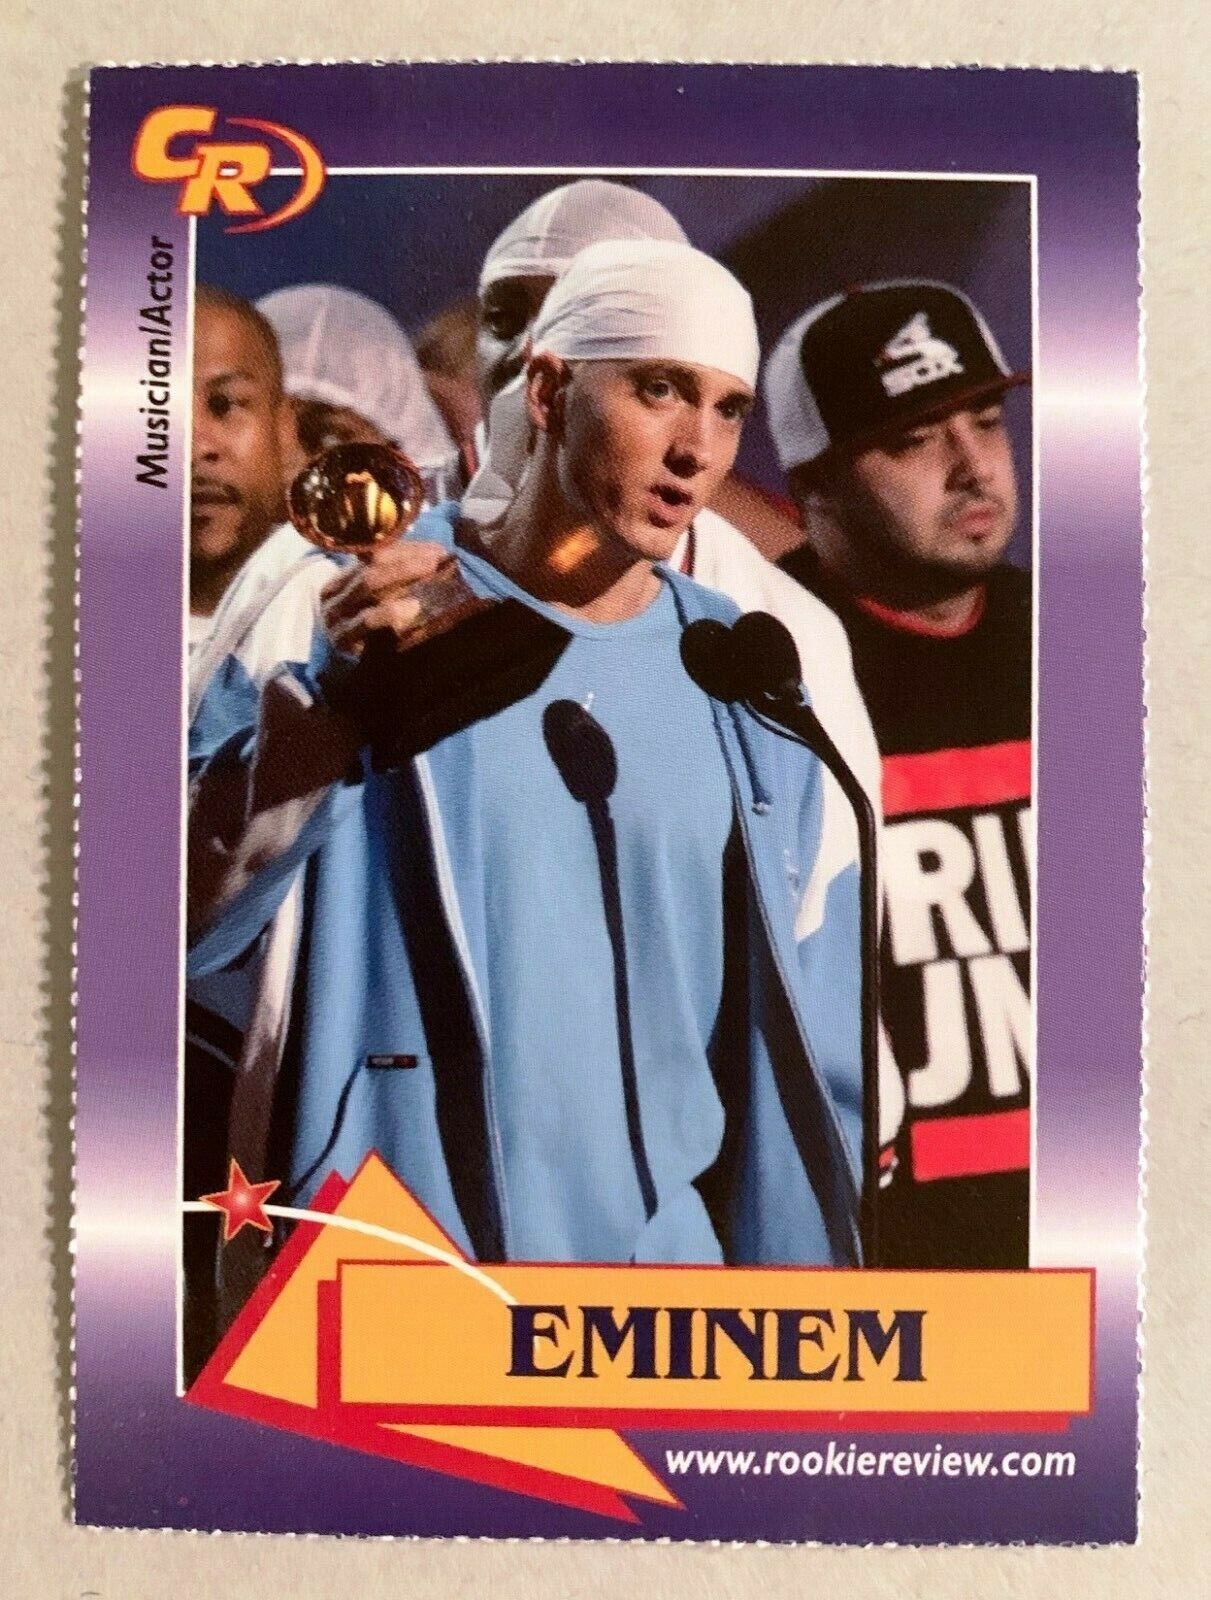 EMINEM - Musician / Actor 2003 Celebrity Rookie Review Card #3